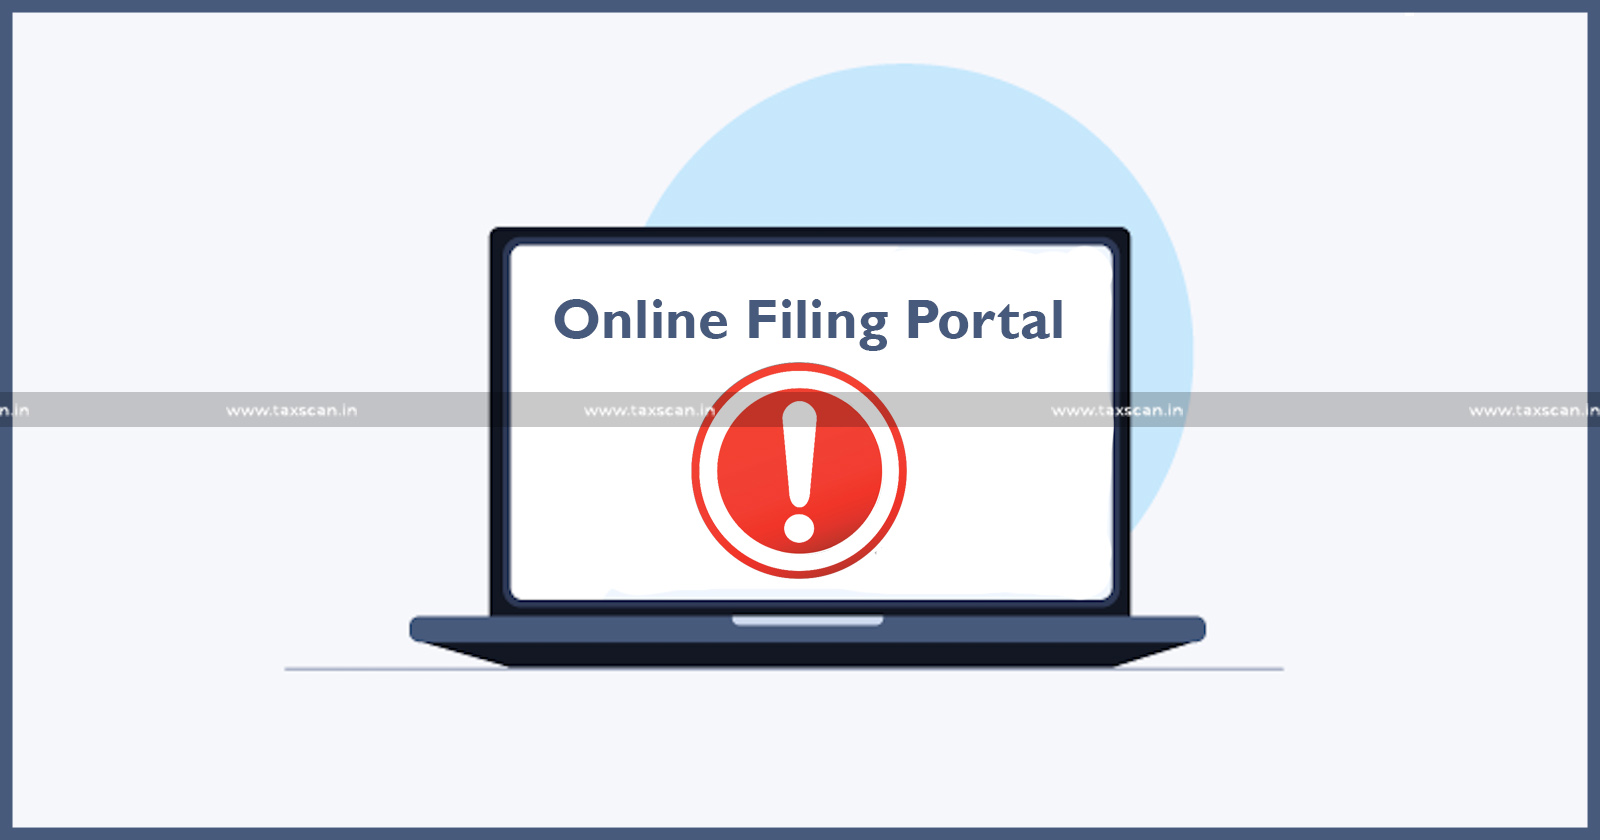 Madras High Court - Madras High Court Directs to Decide Maintainability of Statutory Appeal - Statutory Appeal - Online Filing Portal Due to Technical Glitches - Technical Glitches - Taxscan